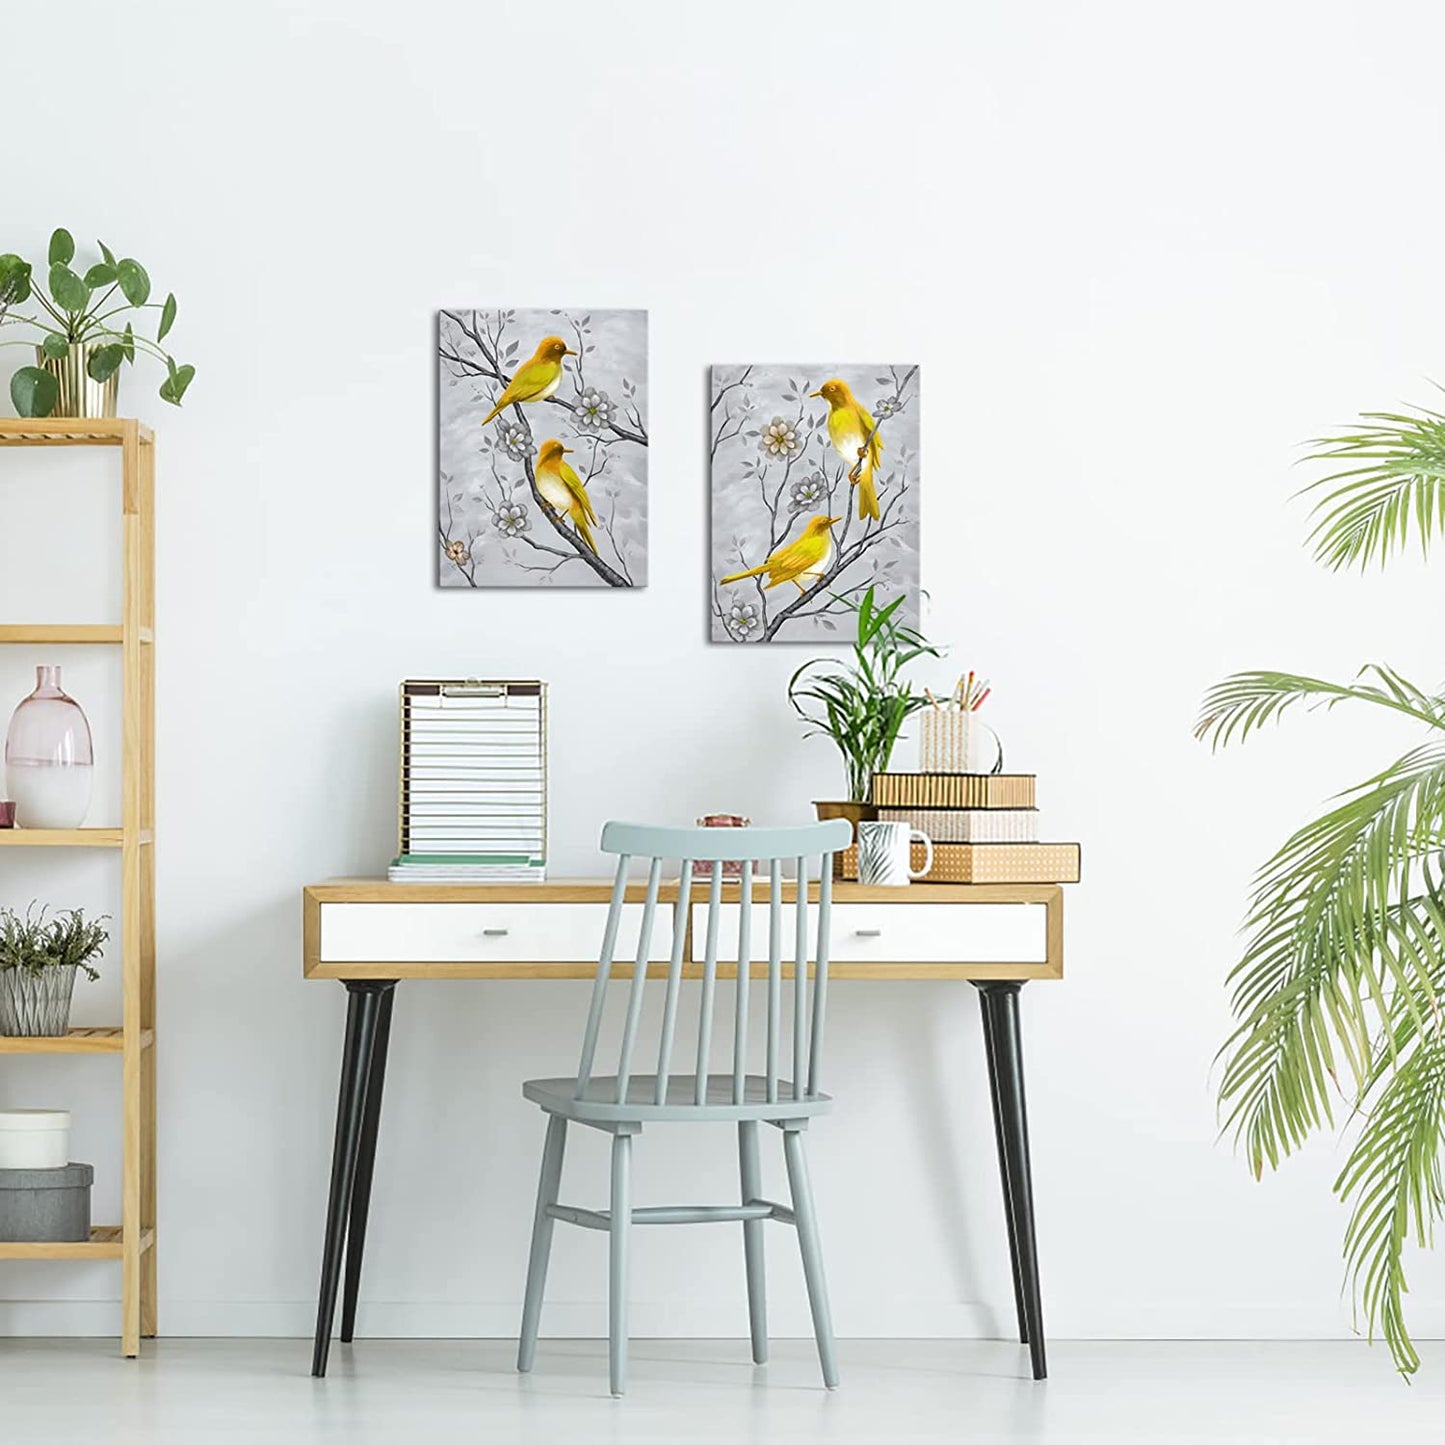 2 Piece Bird Wall Art Sets Yellow and Grey Painting Ready to Hang